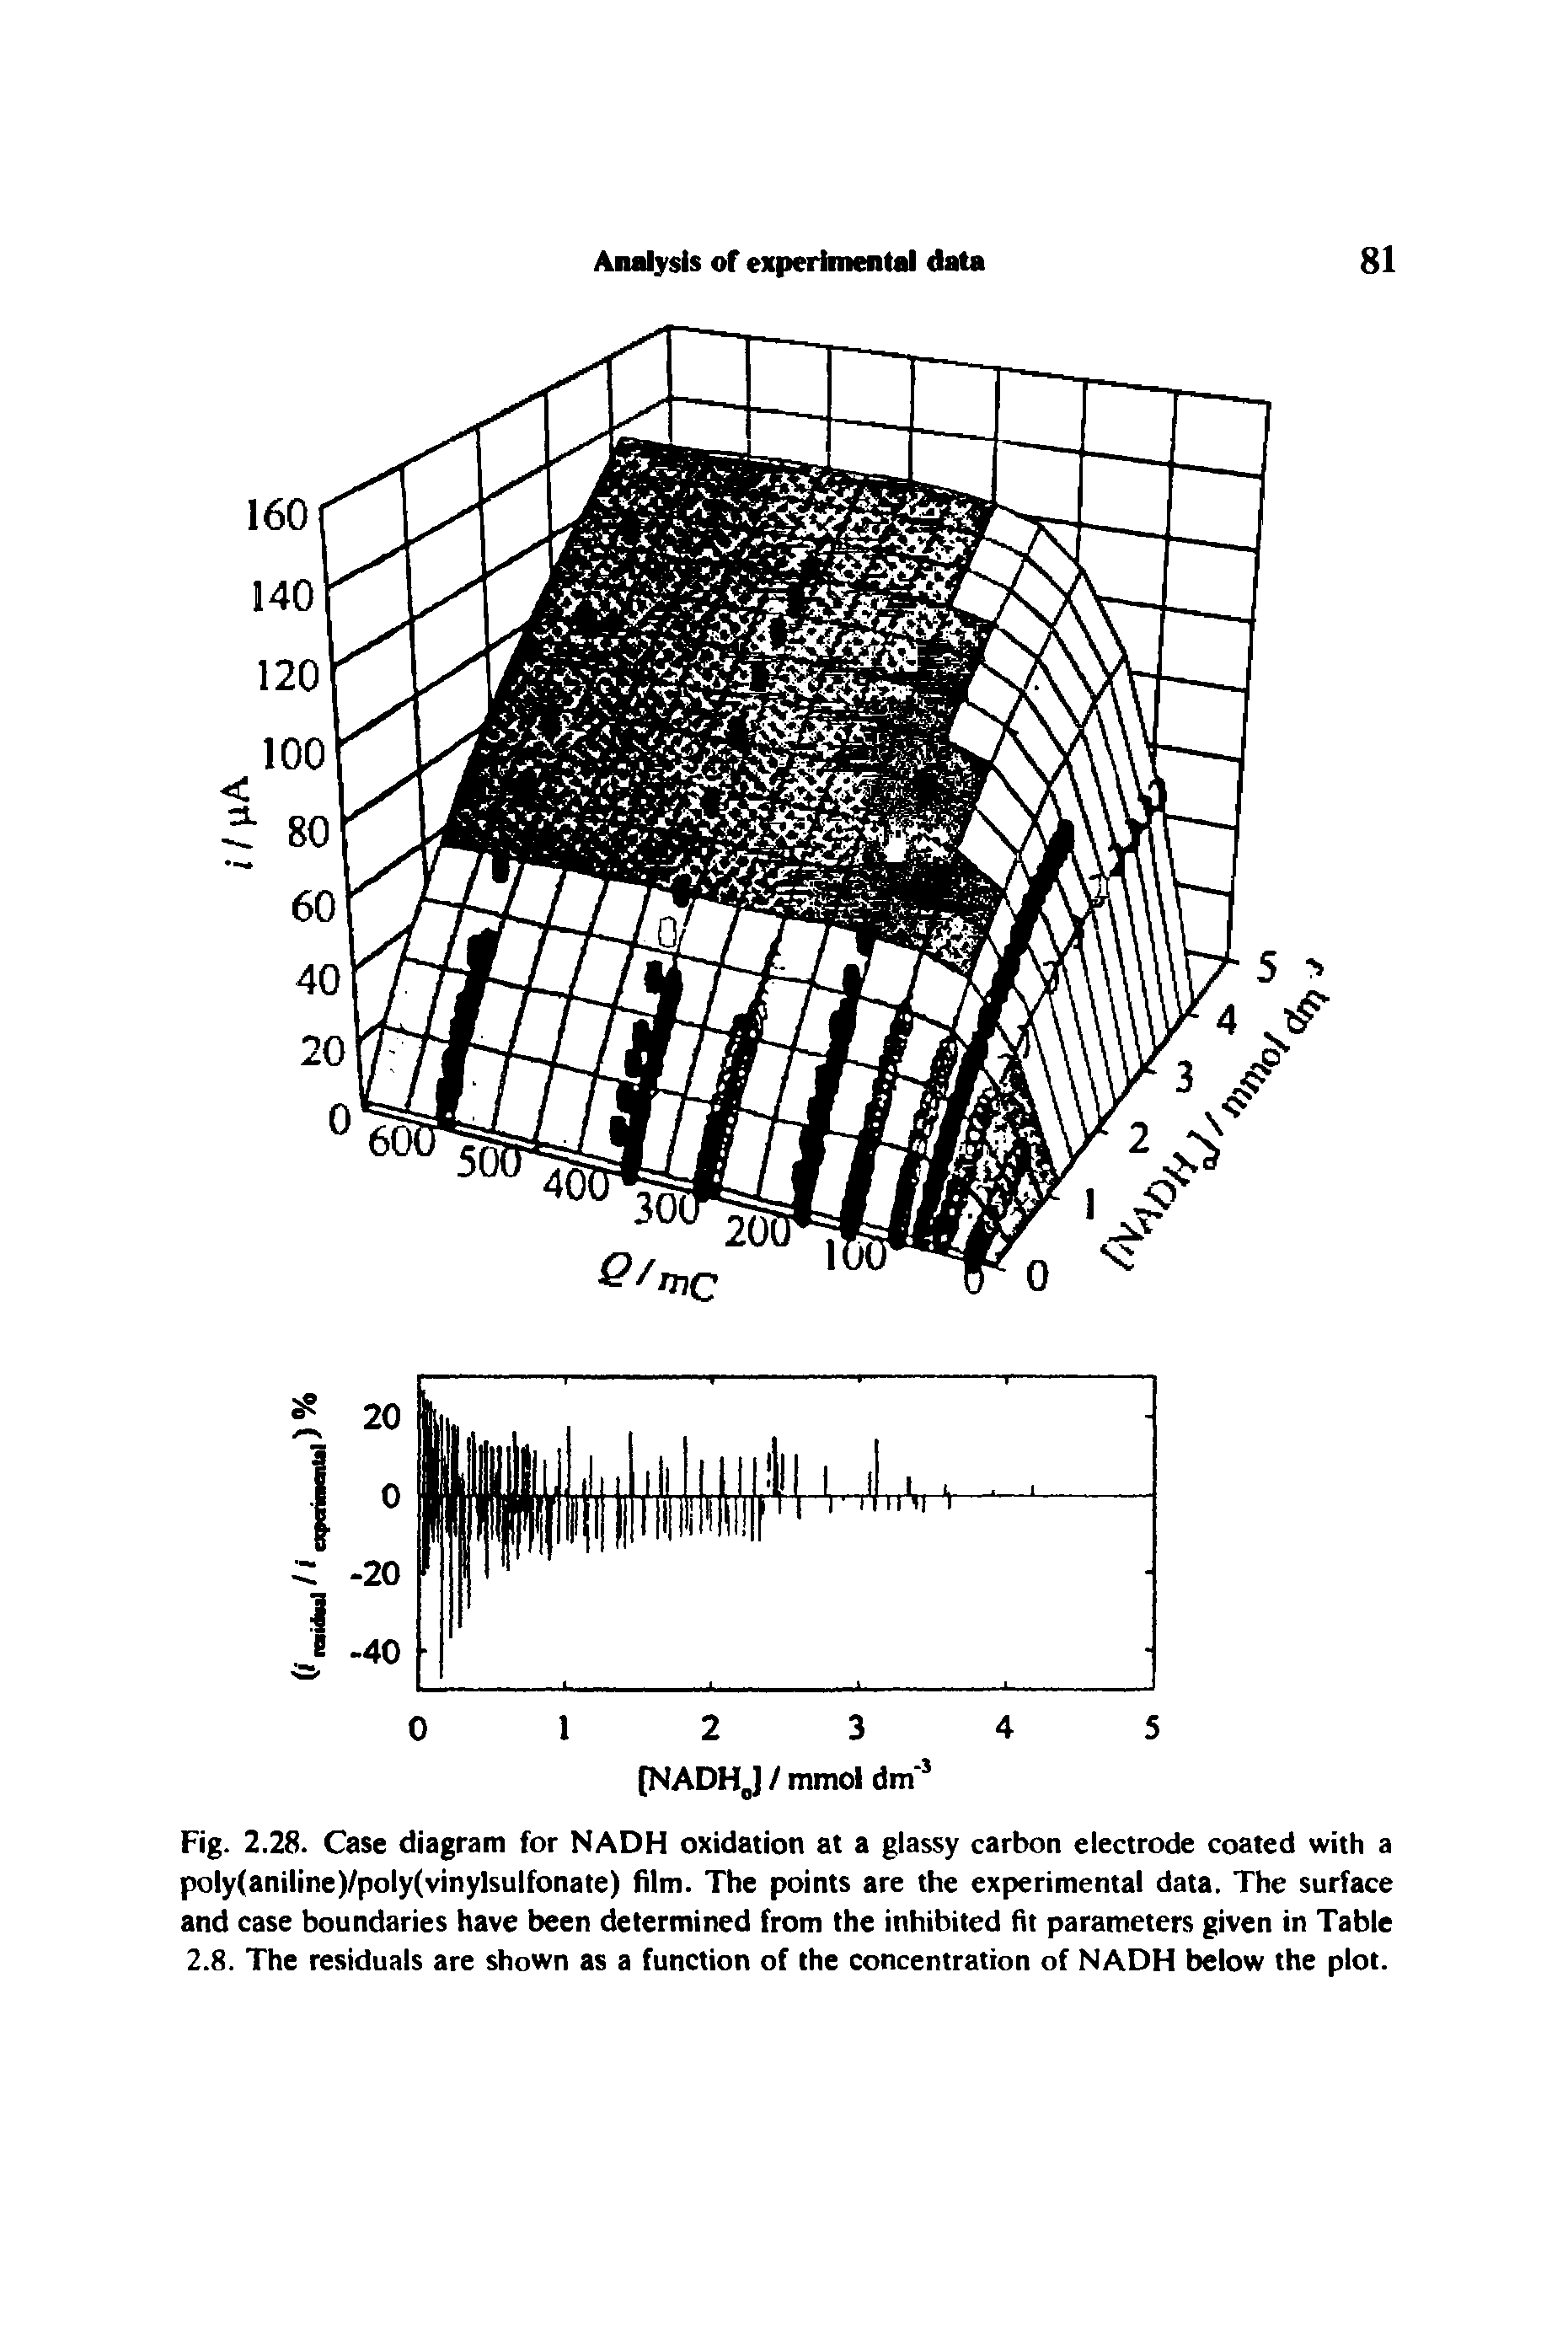 Fig. 2.28. Case diagram for NADH oxidation at a glassy carbon electrode coated with a poly(aniline)/poly(vinylsulfonate) film. The points are the experimental data. The surface and case boundaries have been determined from the inhibited fit parameters given in Table 2.8. The residuals are shown as a function of the concentration of NADH below the plot.